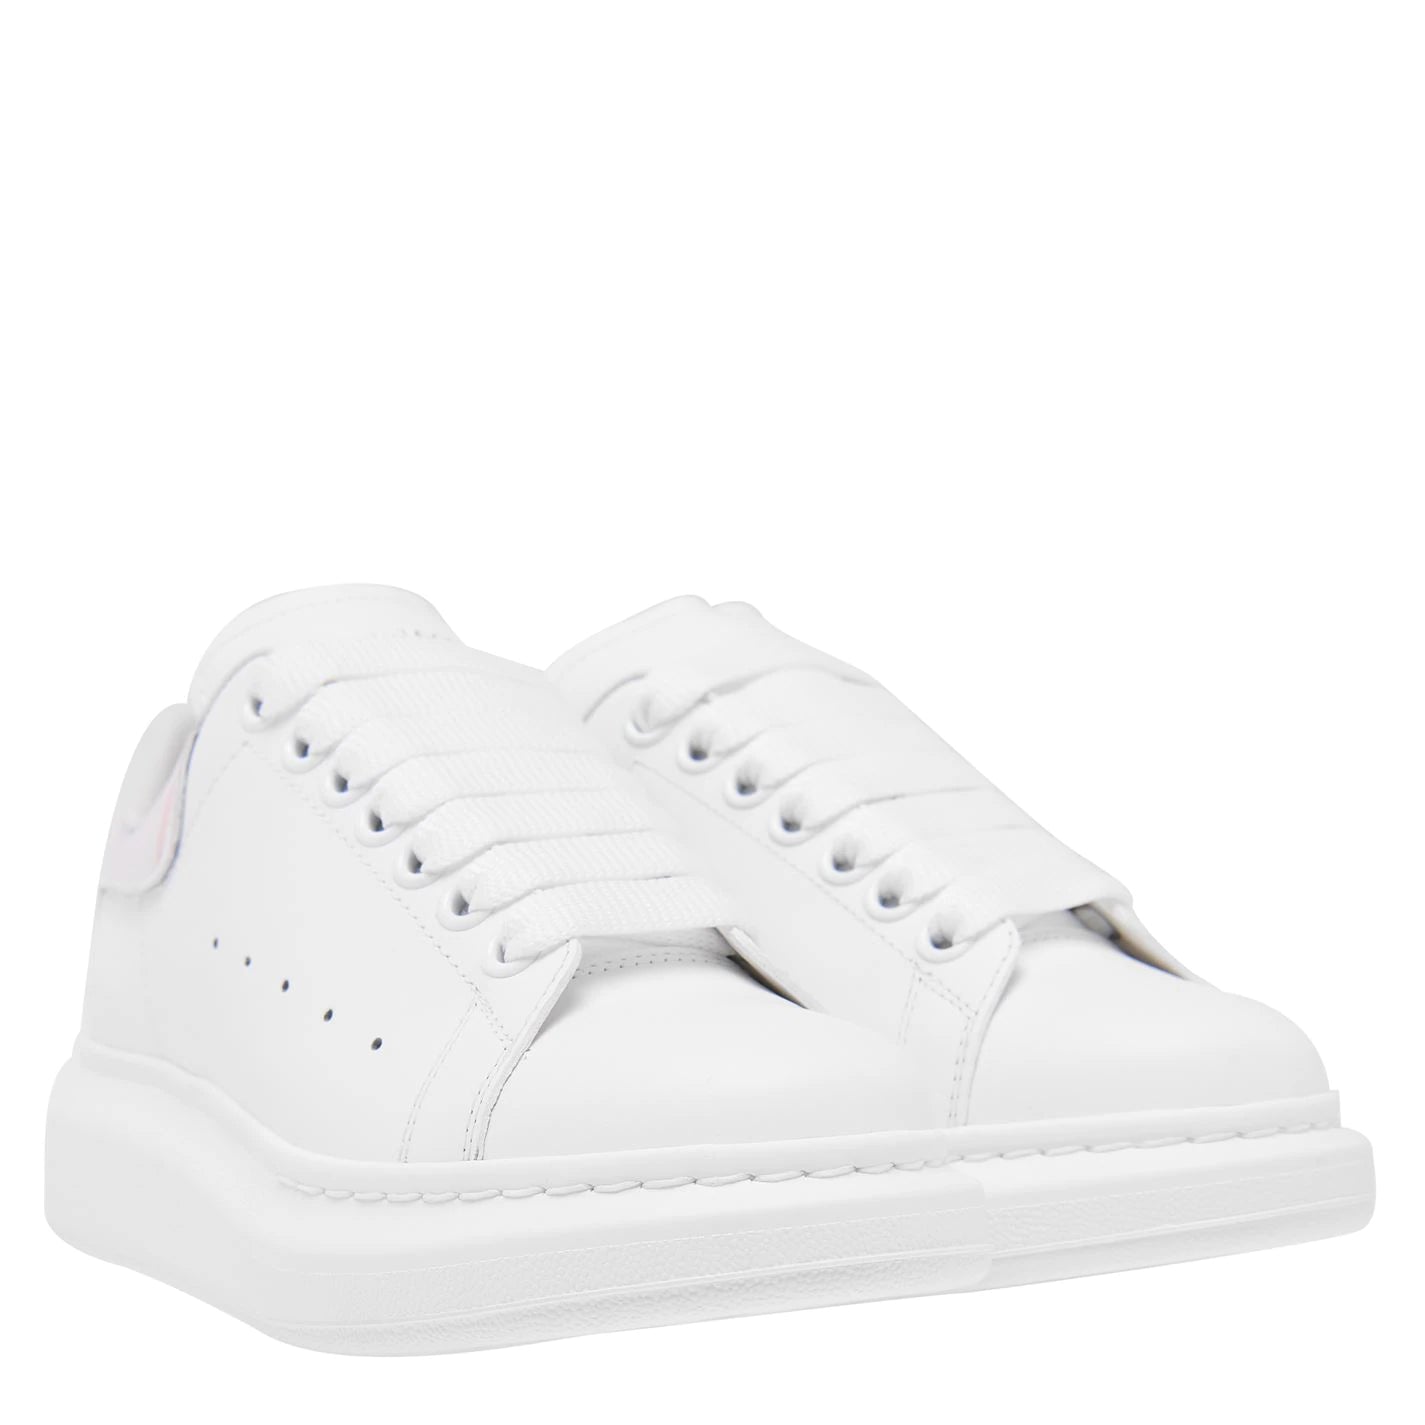 Double Boxed  419.99 Alexander McQueen Oversized White Iridescent Women's Double Boxed